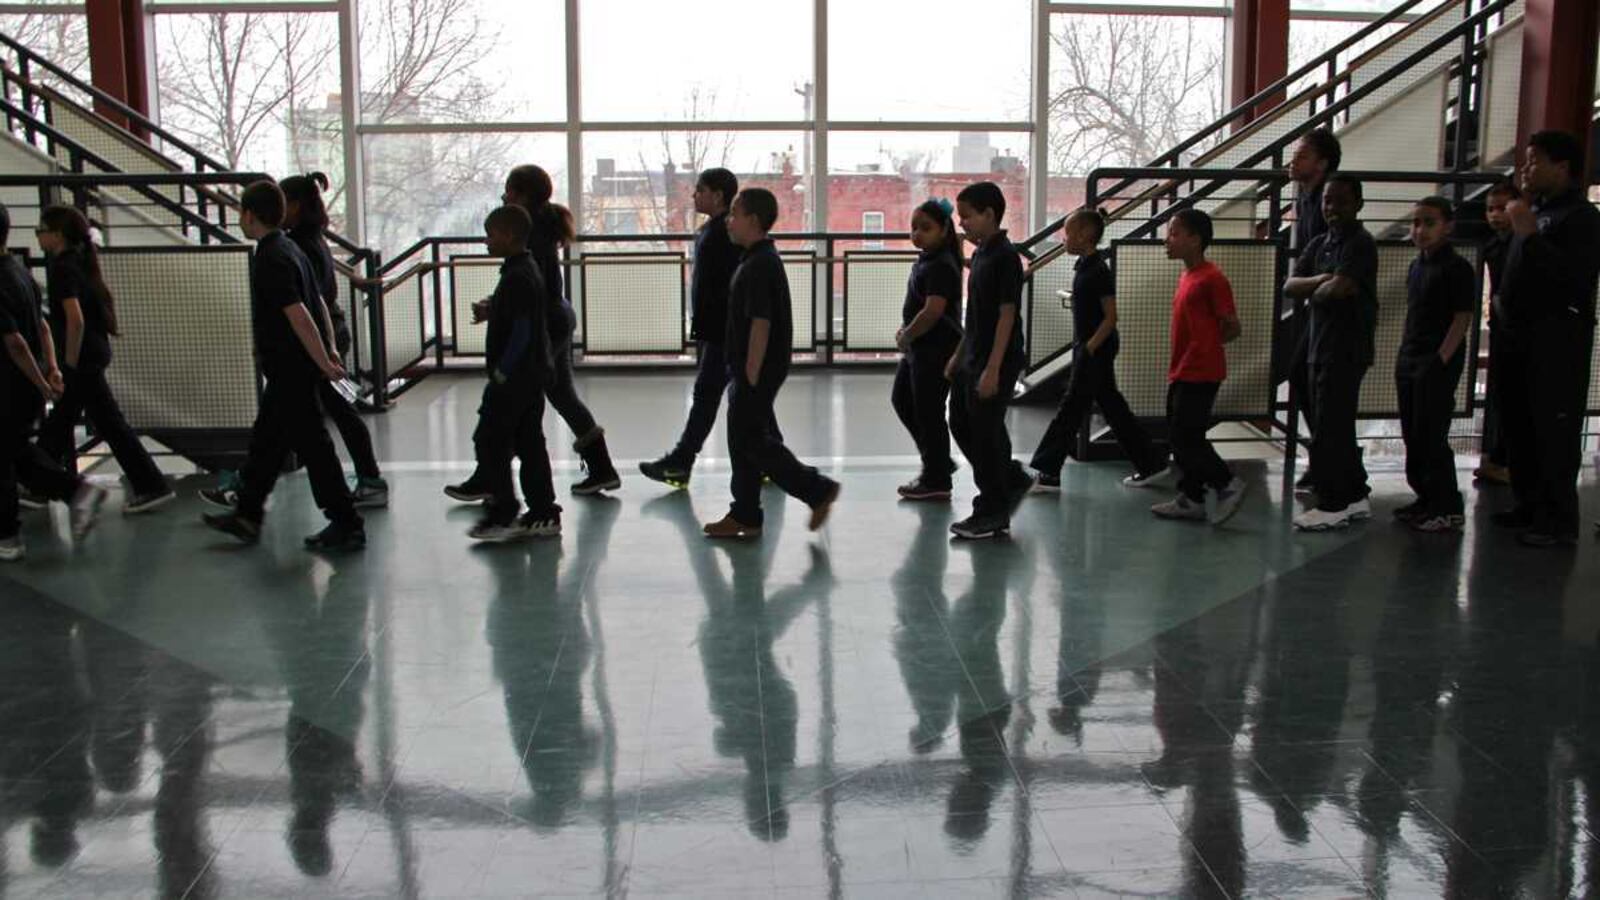 Students walk in a hallway, with their shadows visible on the floor.